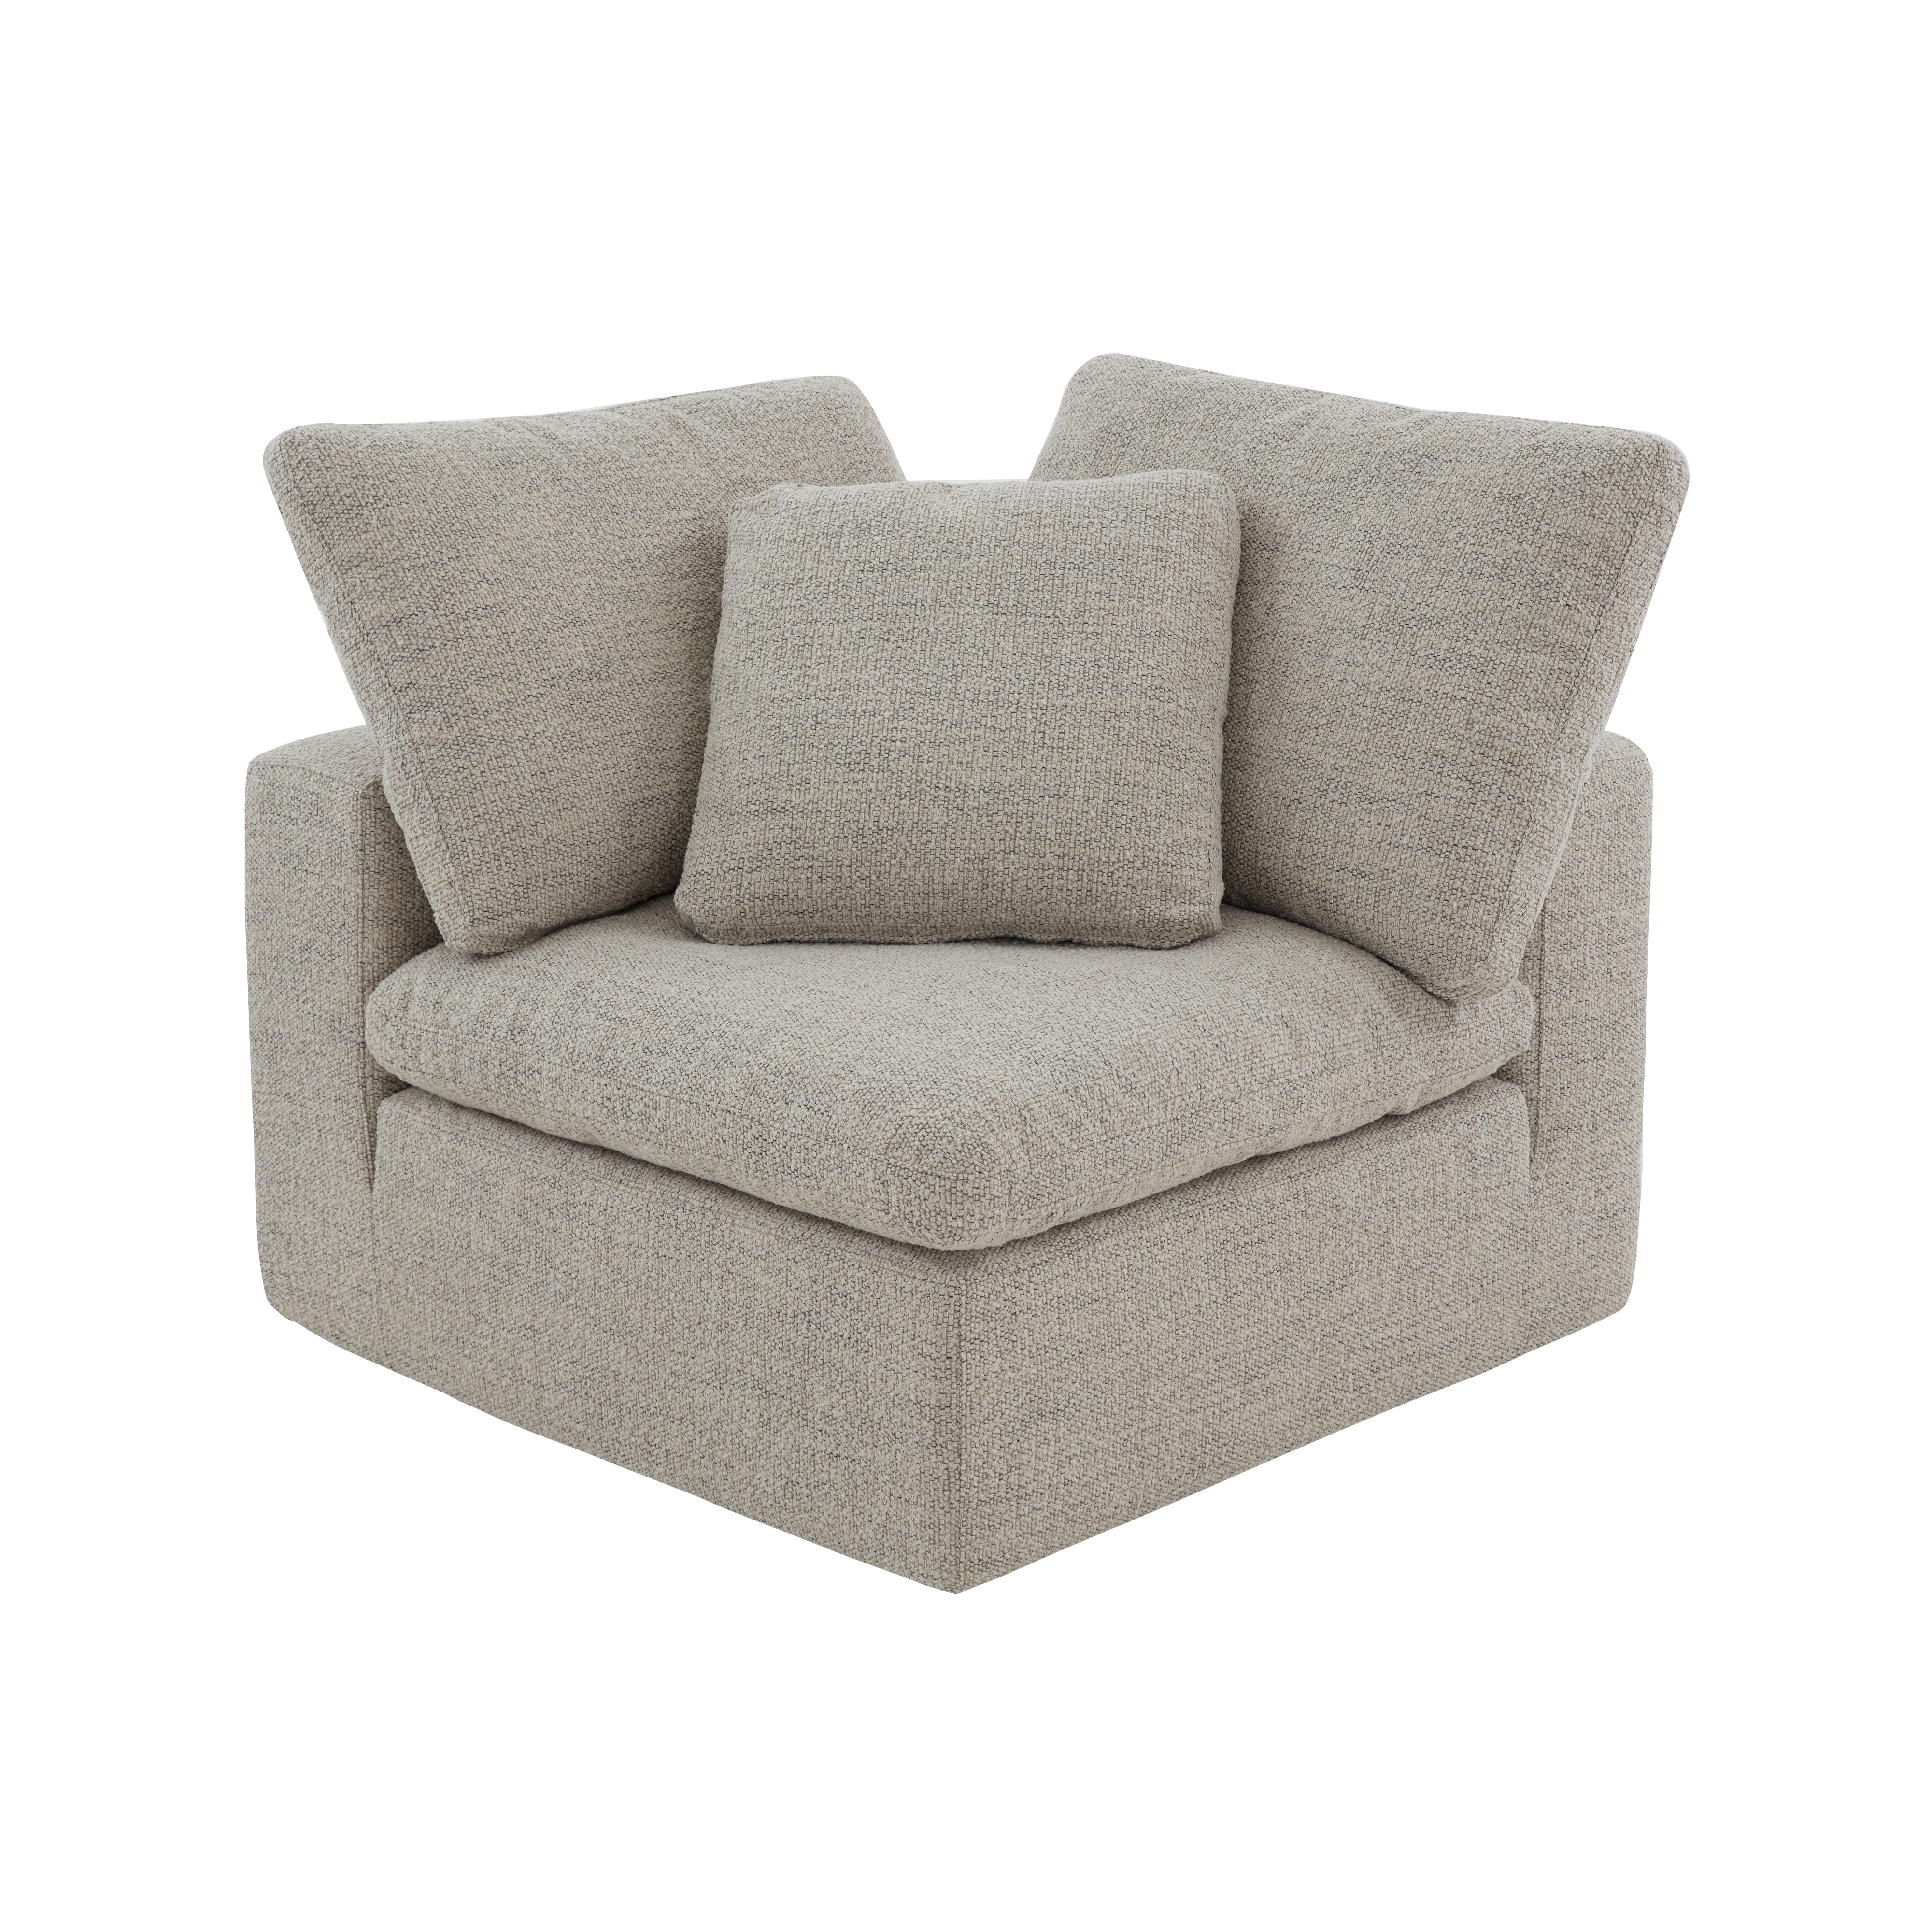 Movie Night™ Corner Chair Standard Oatmeal (Left Or Right) - Image 12